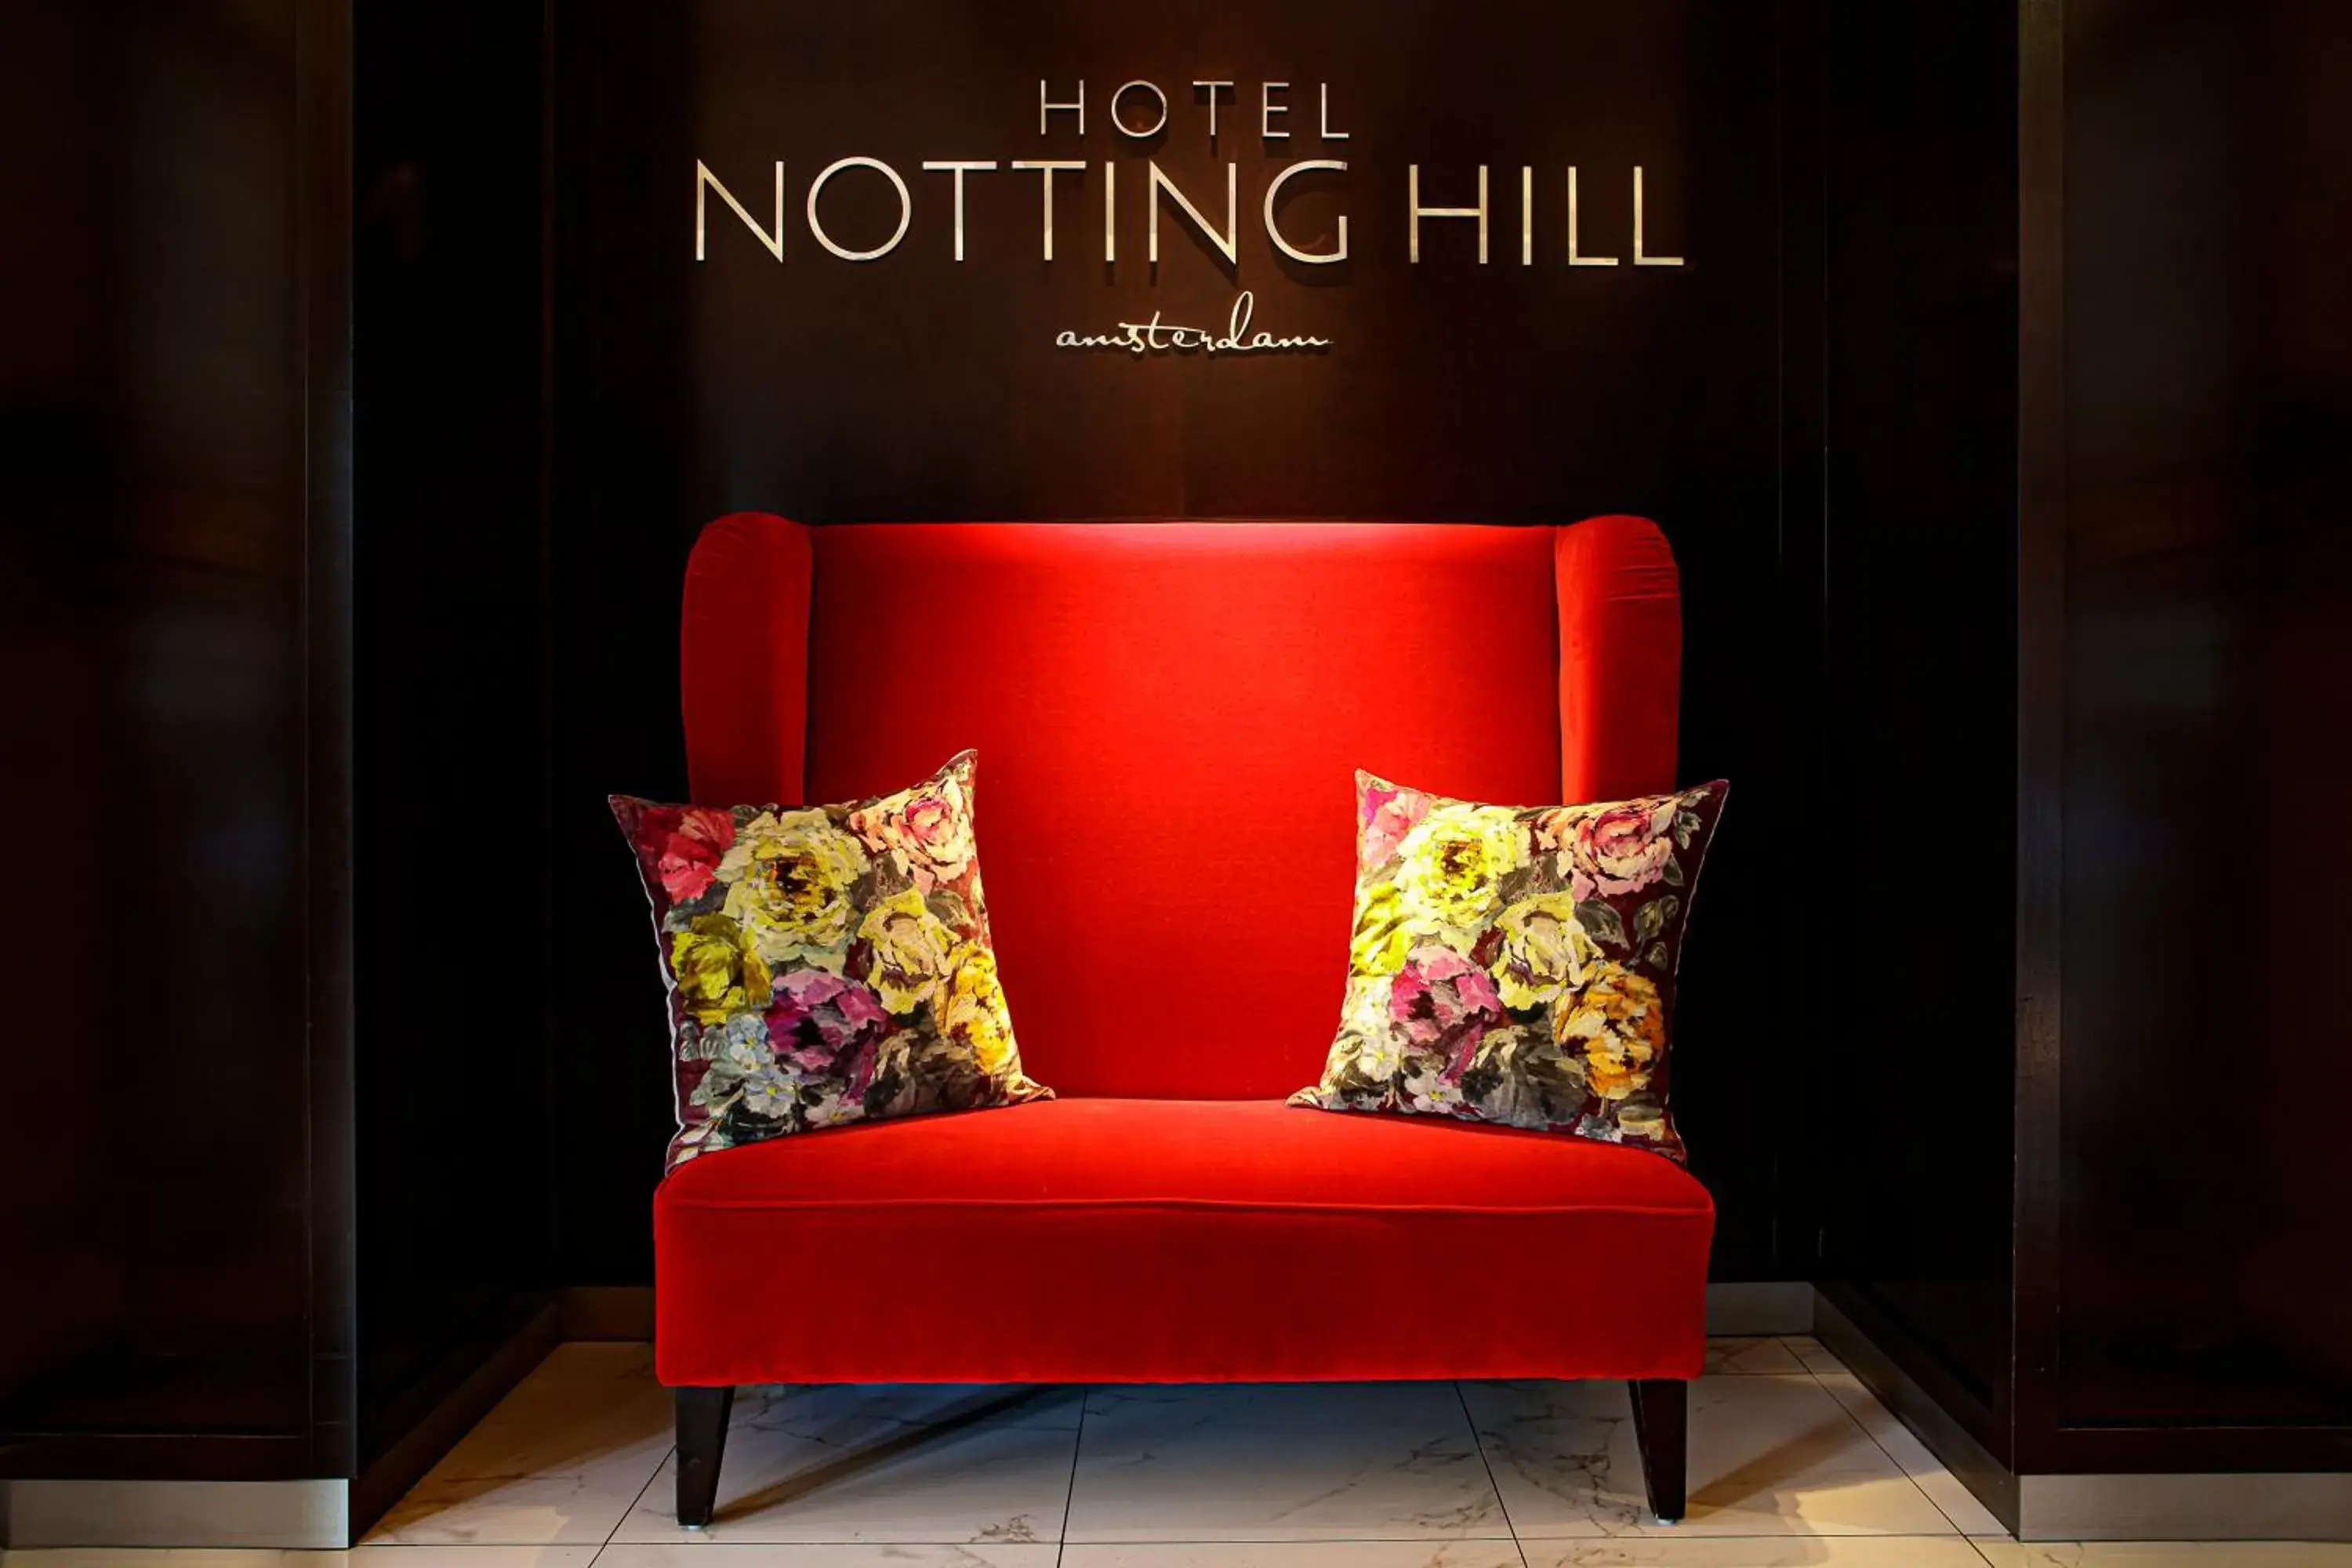 Property logo or sign in Boutique Hotel Notting Hill